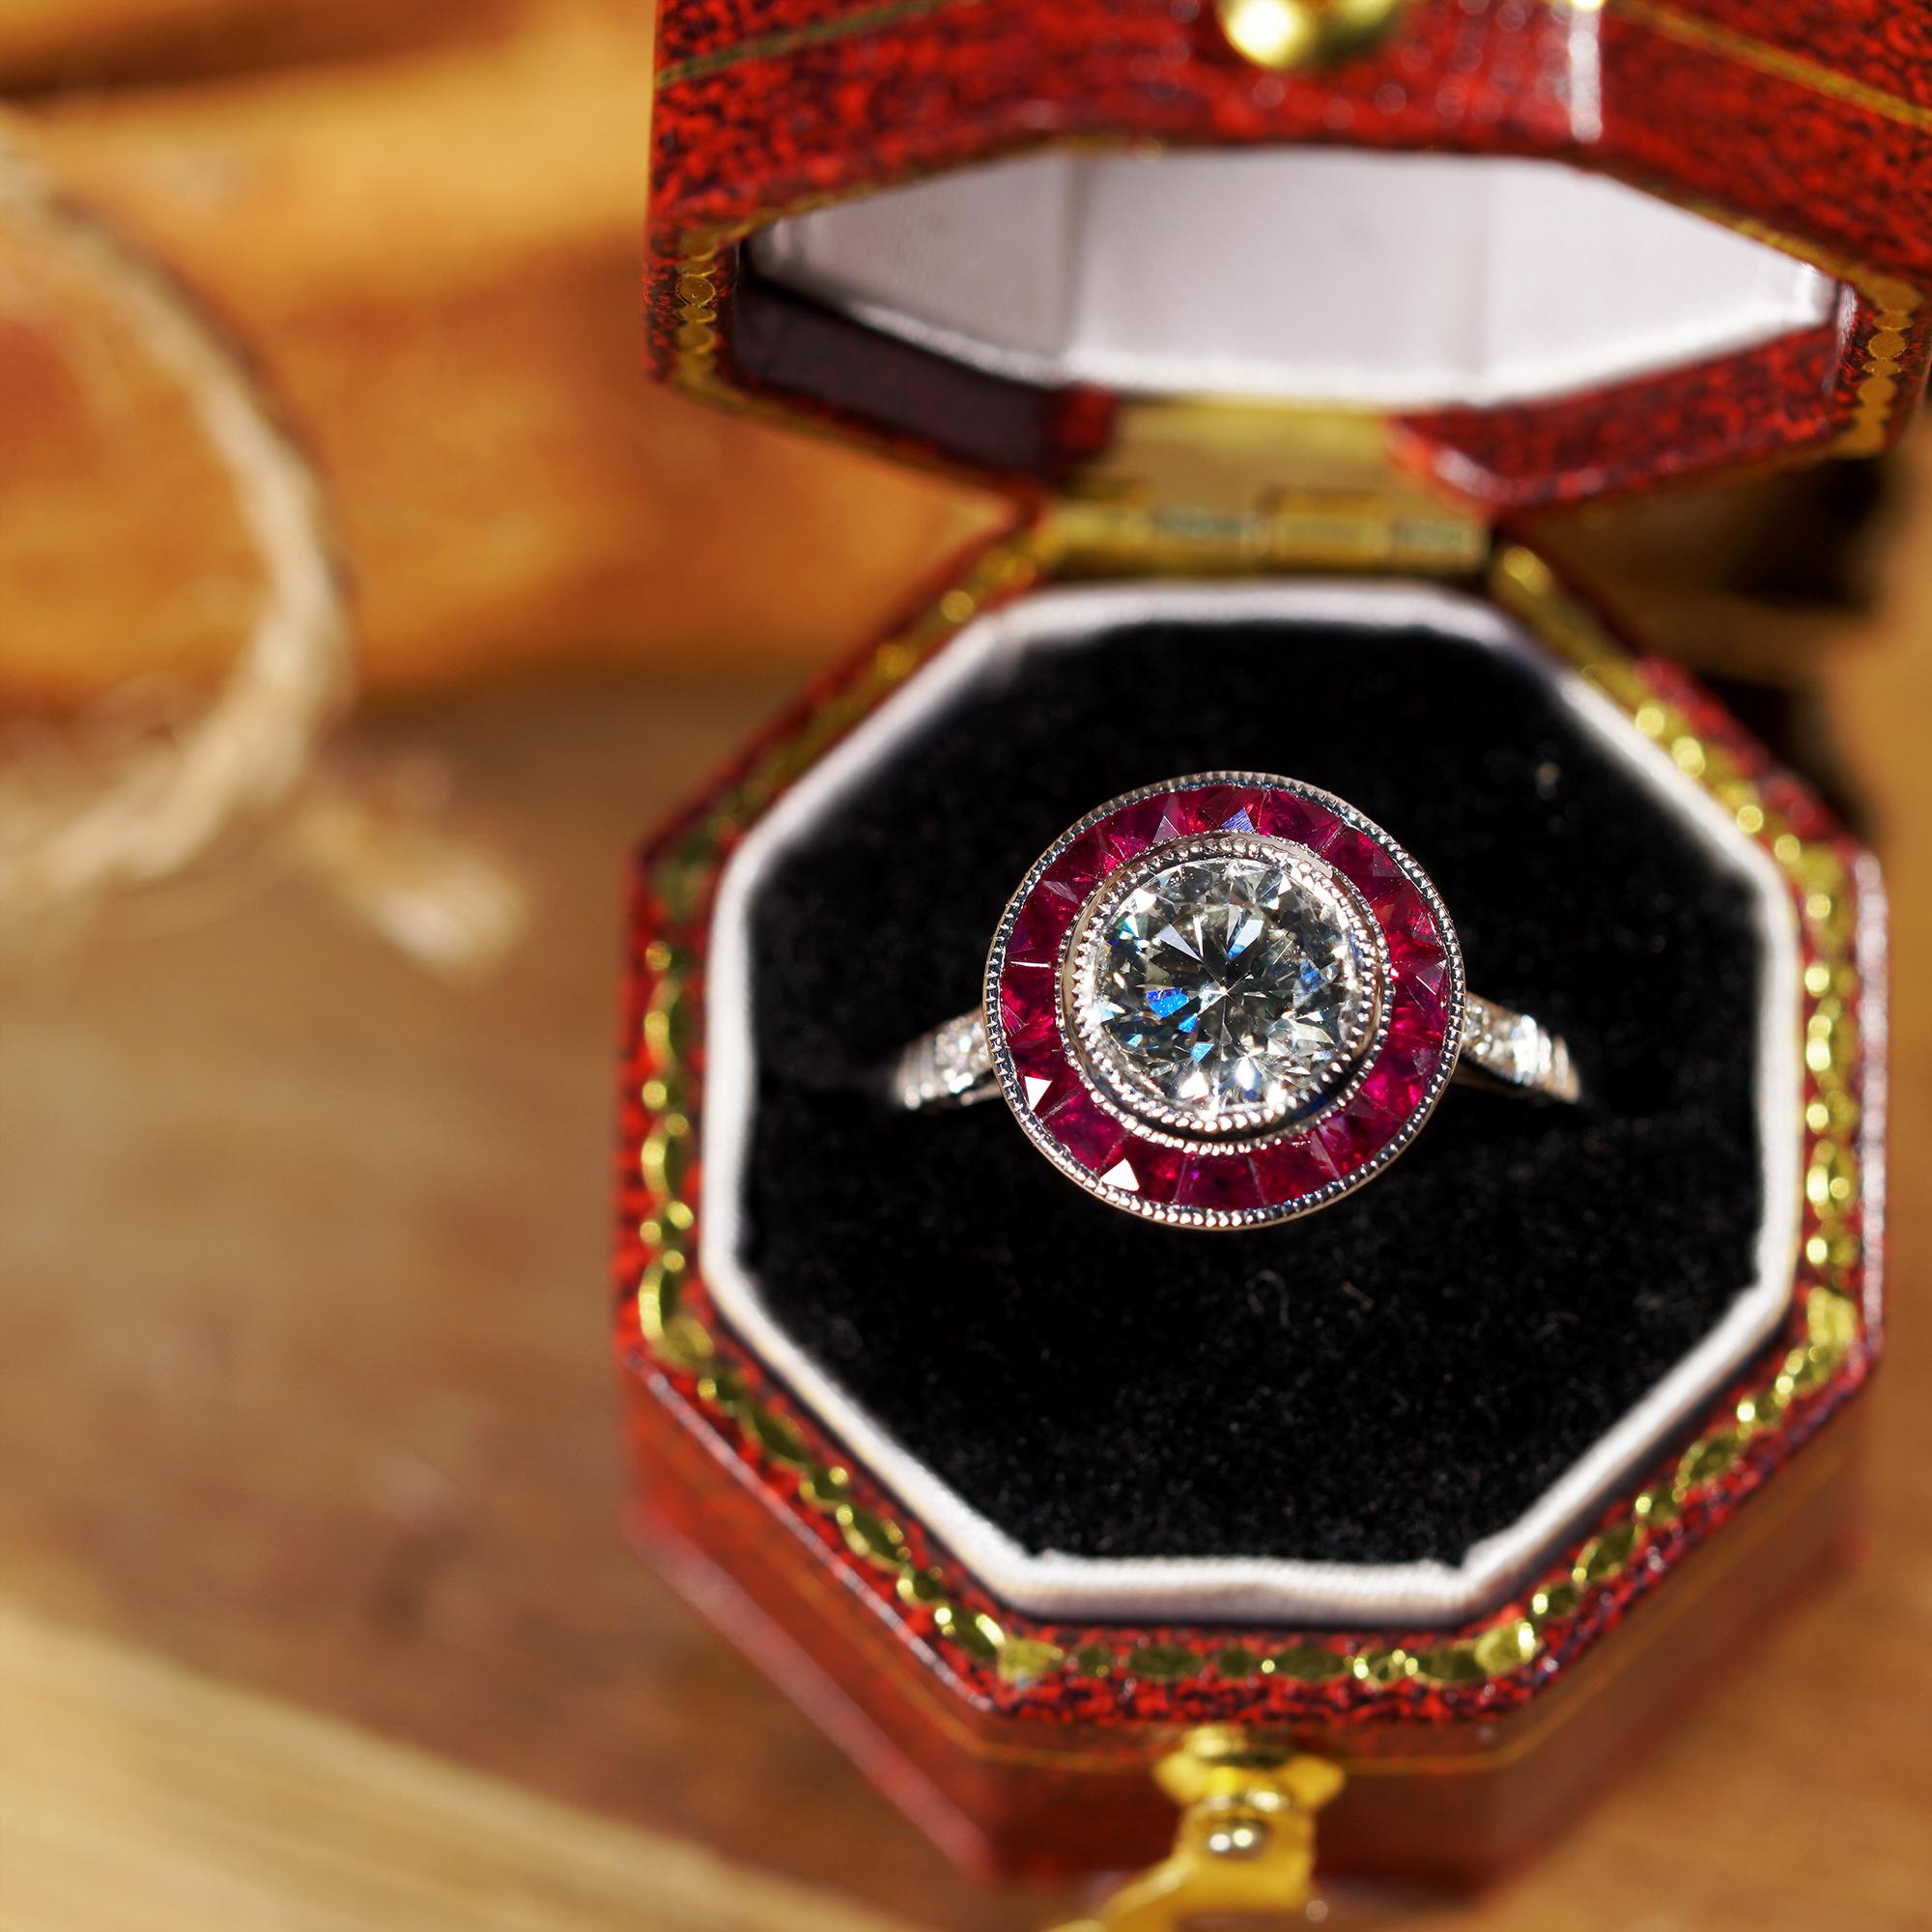 An Art Deco inspired target ring, boasting a central bezel set GIA certified 1 carat diamond with a color of N and clarity of VVS1. The central diamond is surrounded by a halo of channel set French cut rubies. The round diamonds on shoulders add the